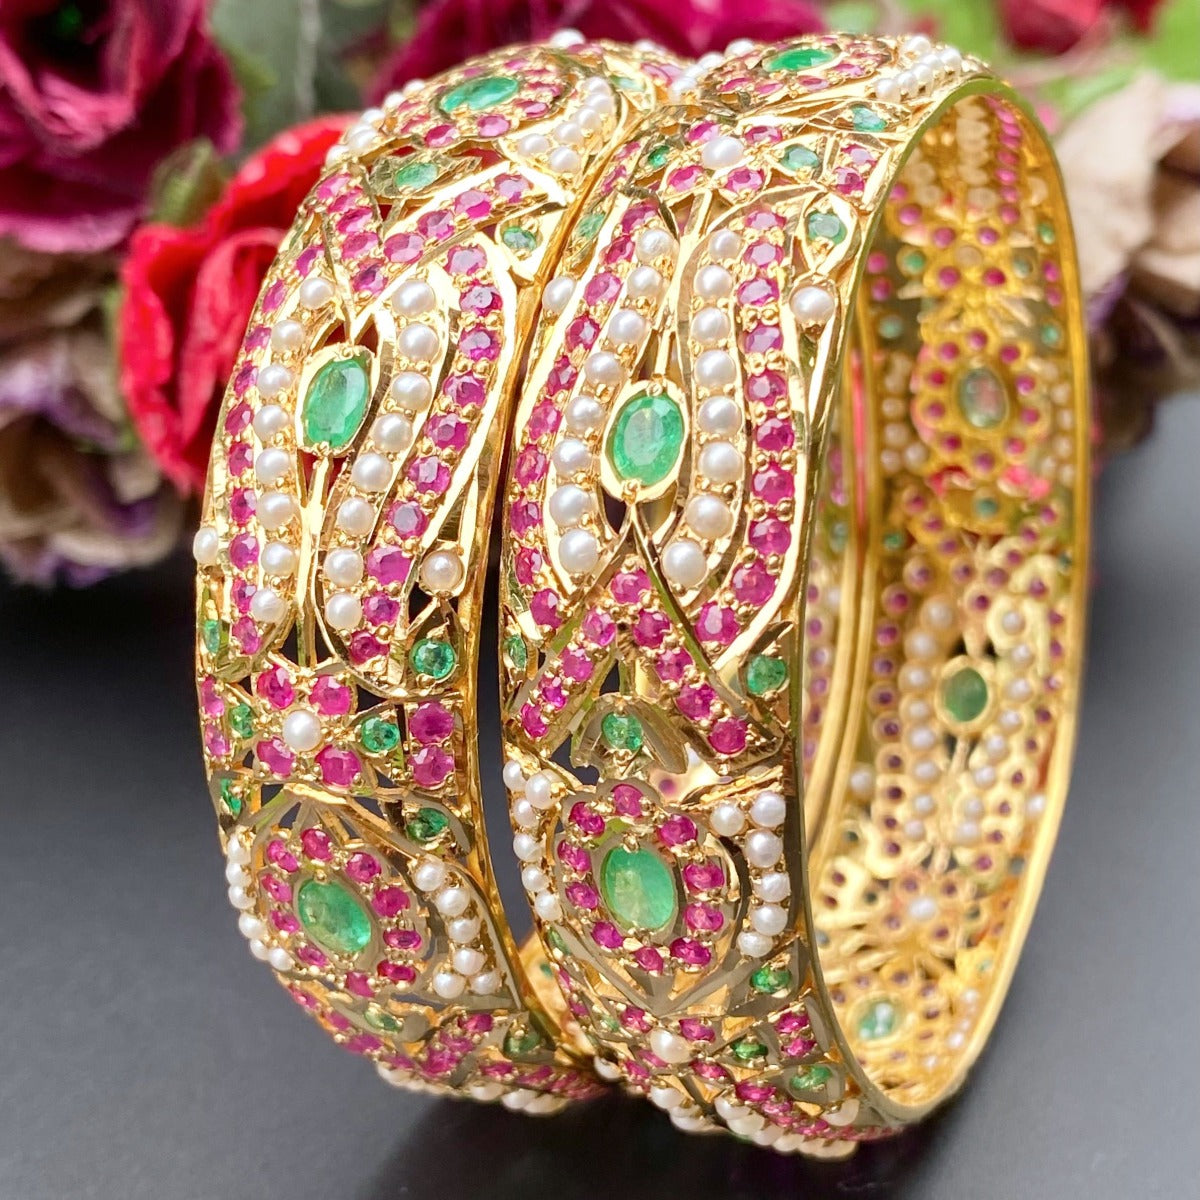 22k gold bangles with rubies and emeralds